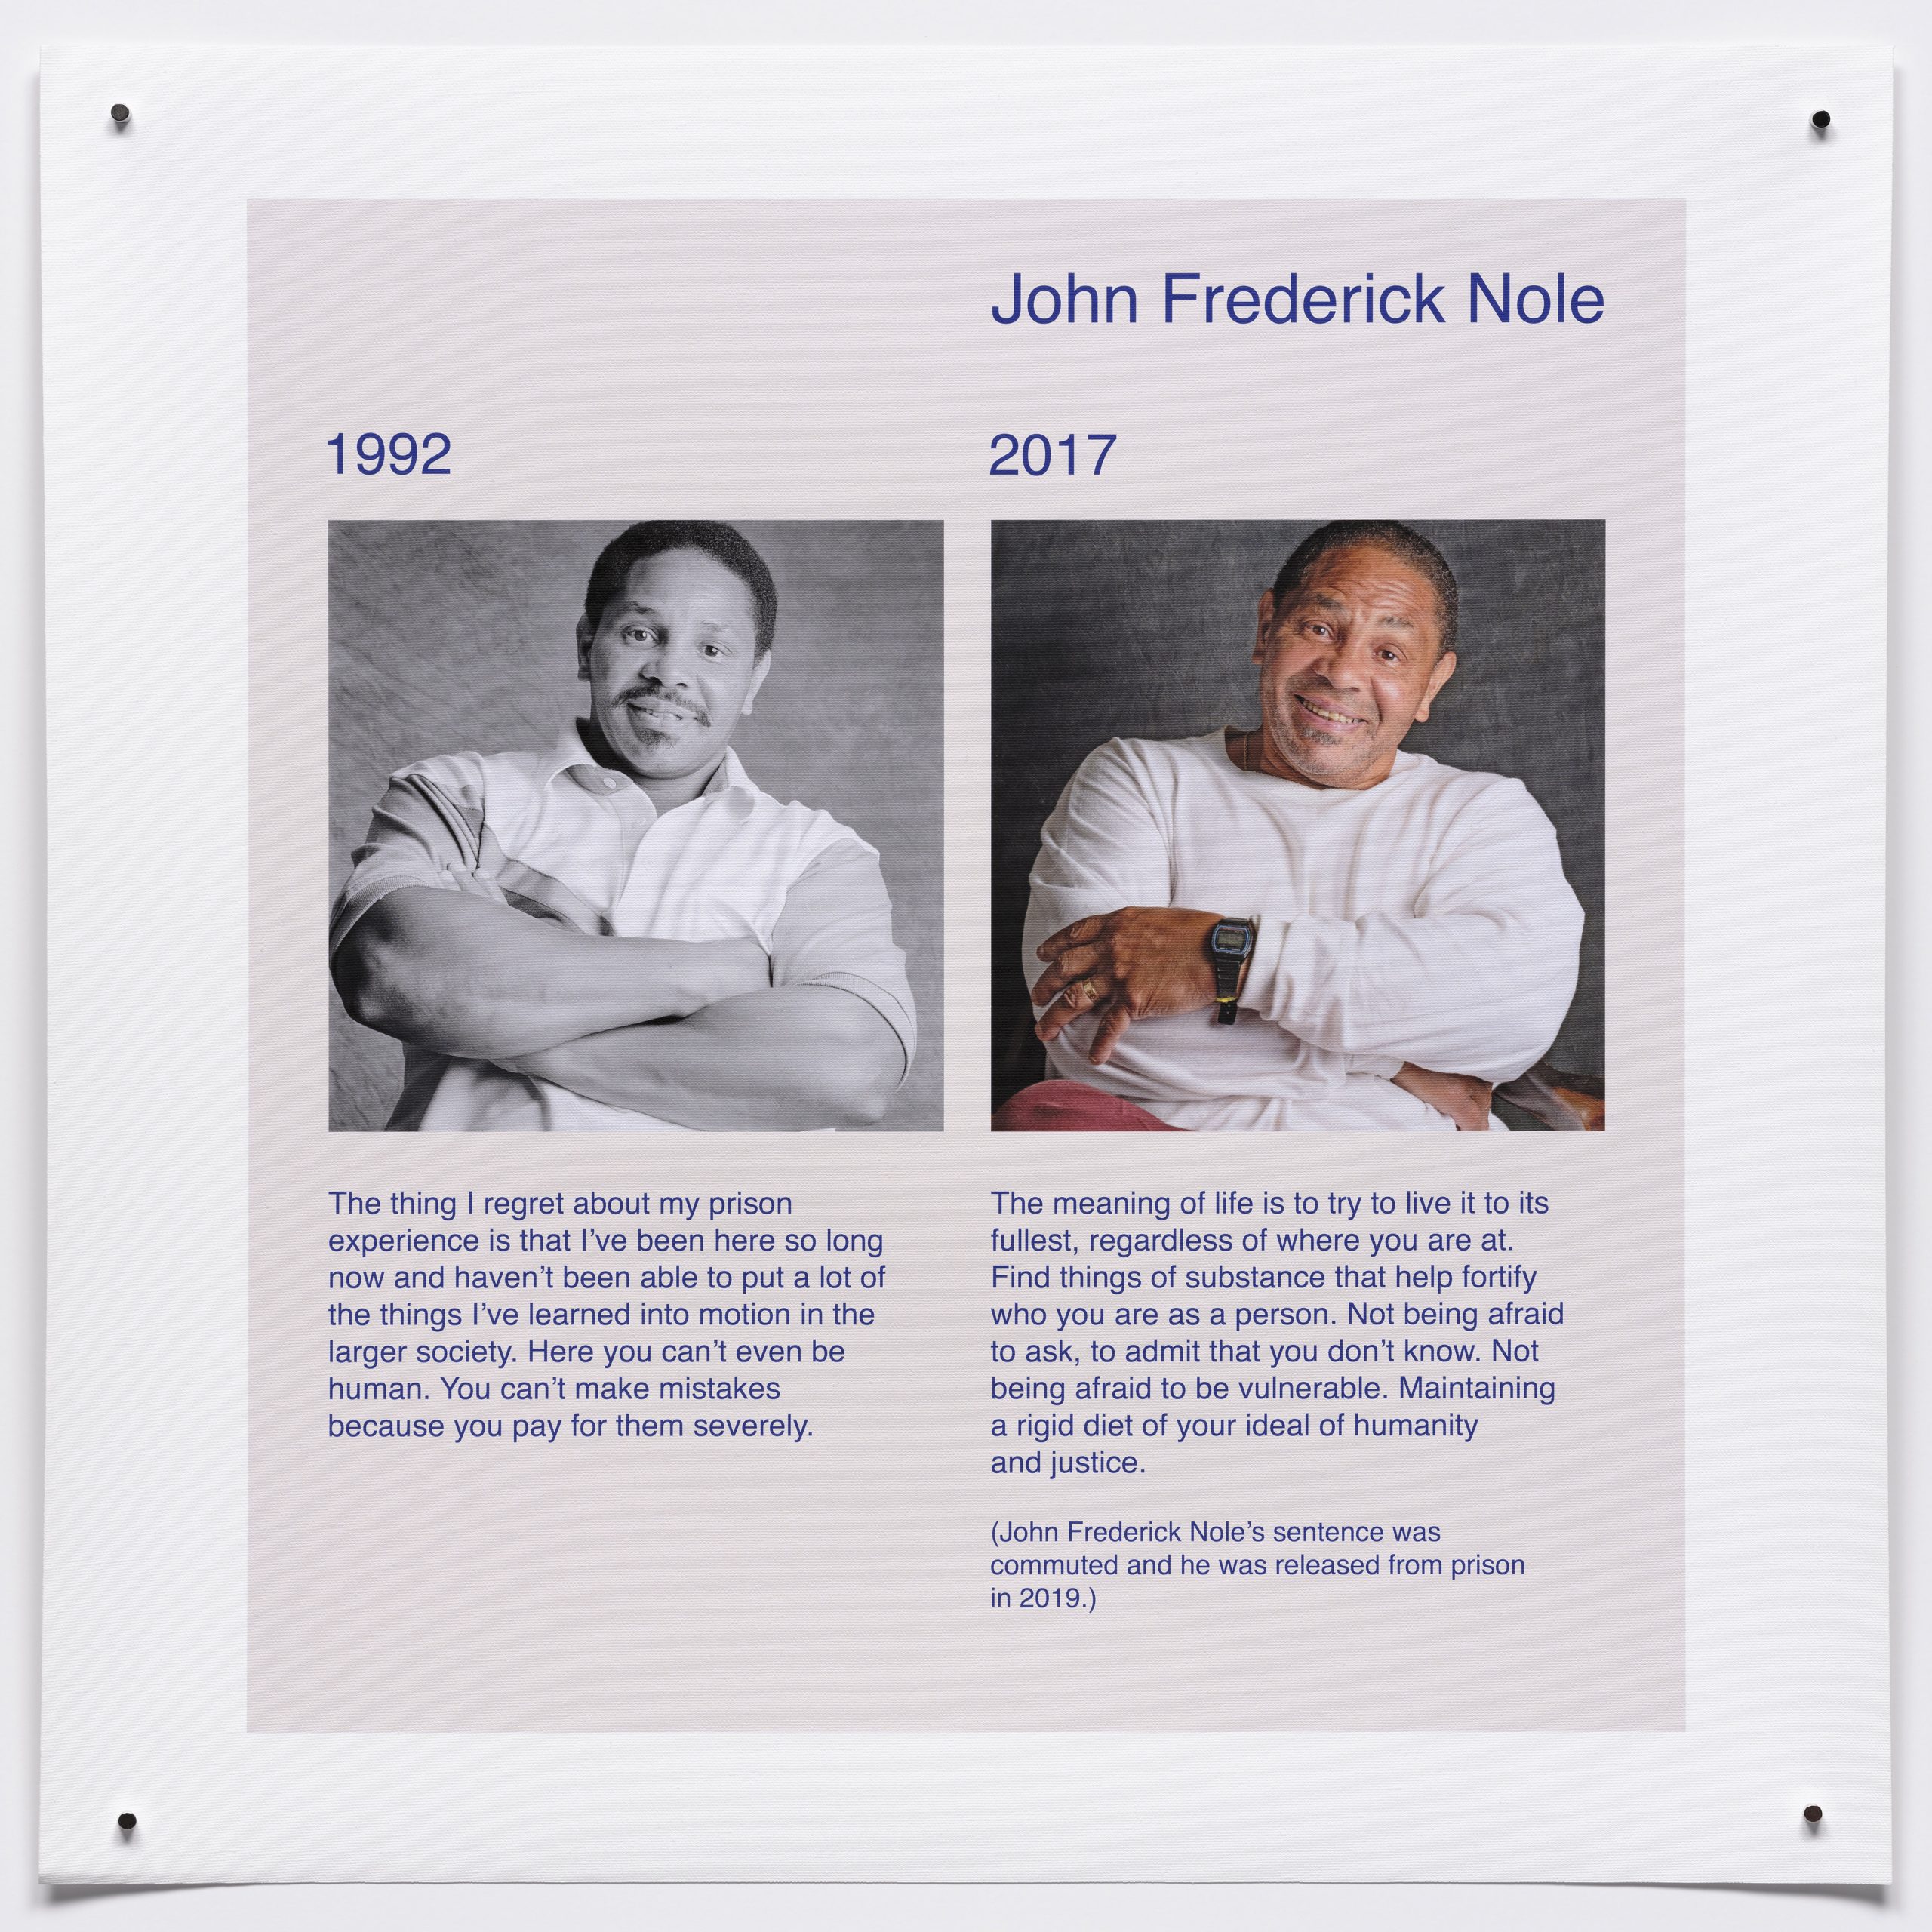 Two photographs side by side of John Frederick Nole, taken in 1992 and 2017, one in black and white and the other in color. Nole is Black and in both photos he smiles and has his arms crossed across his chest. Text statements appear beneath each photo.